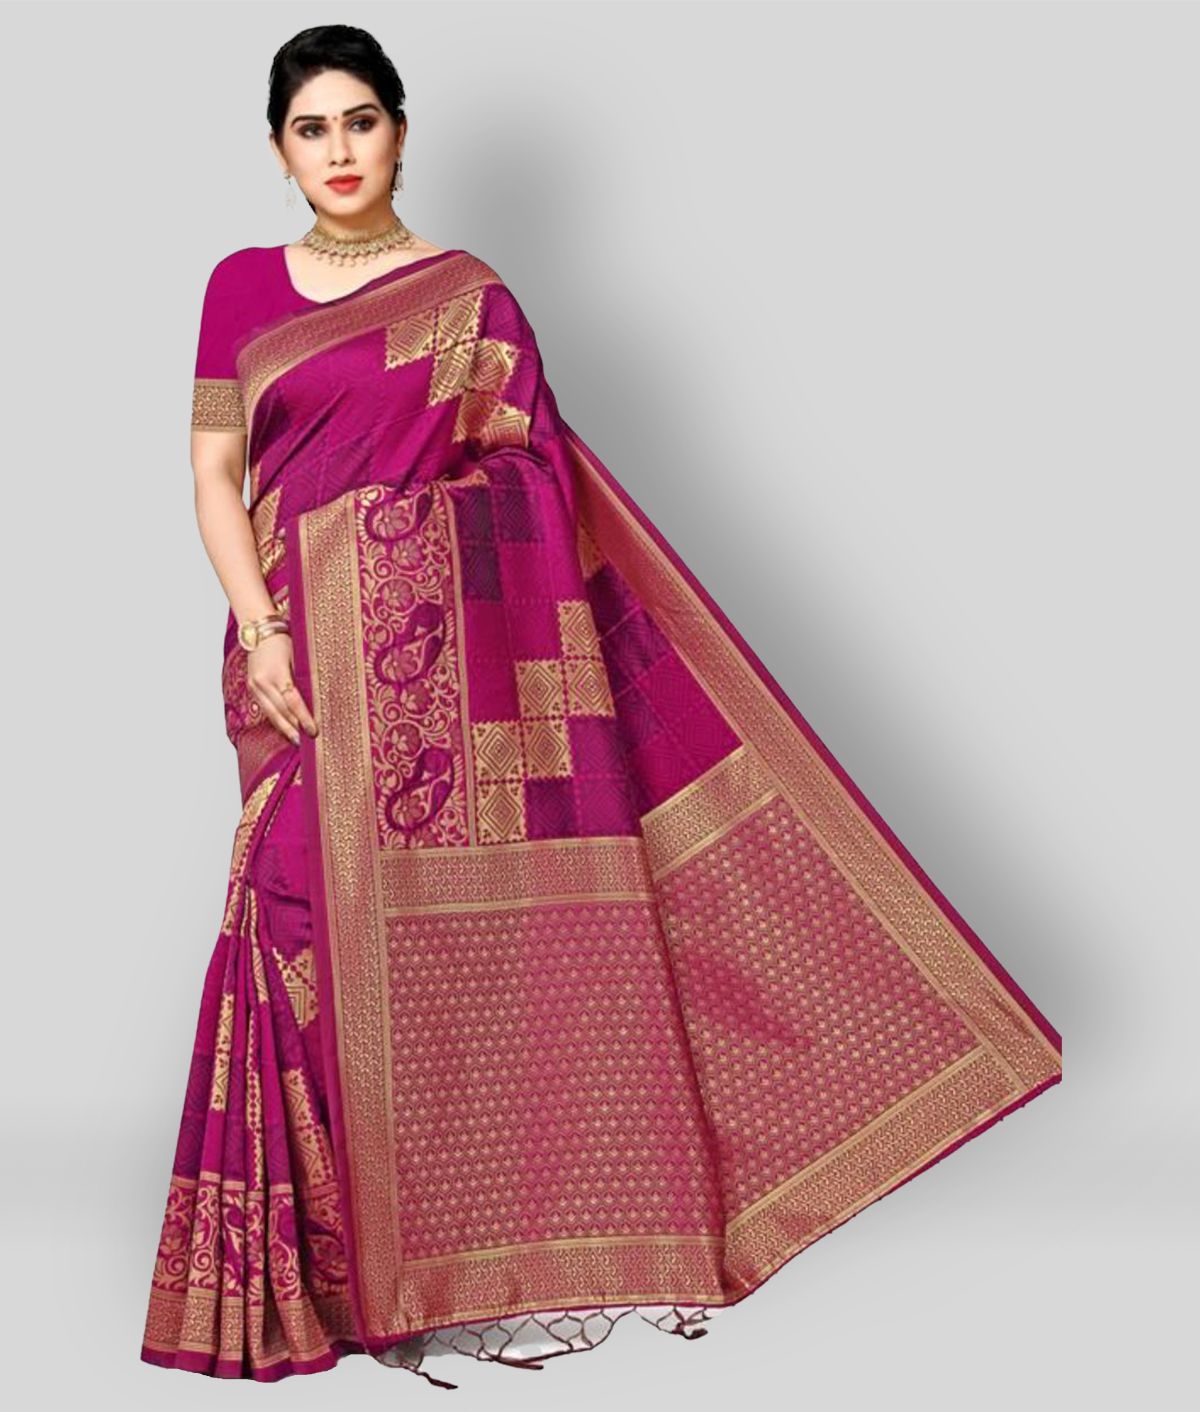 NENCY FASHION - Purple Jacquard Saree With Blouse Piece (Pack of 1)